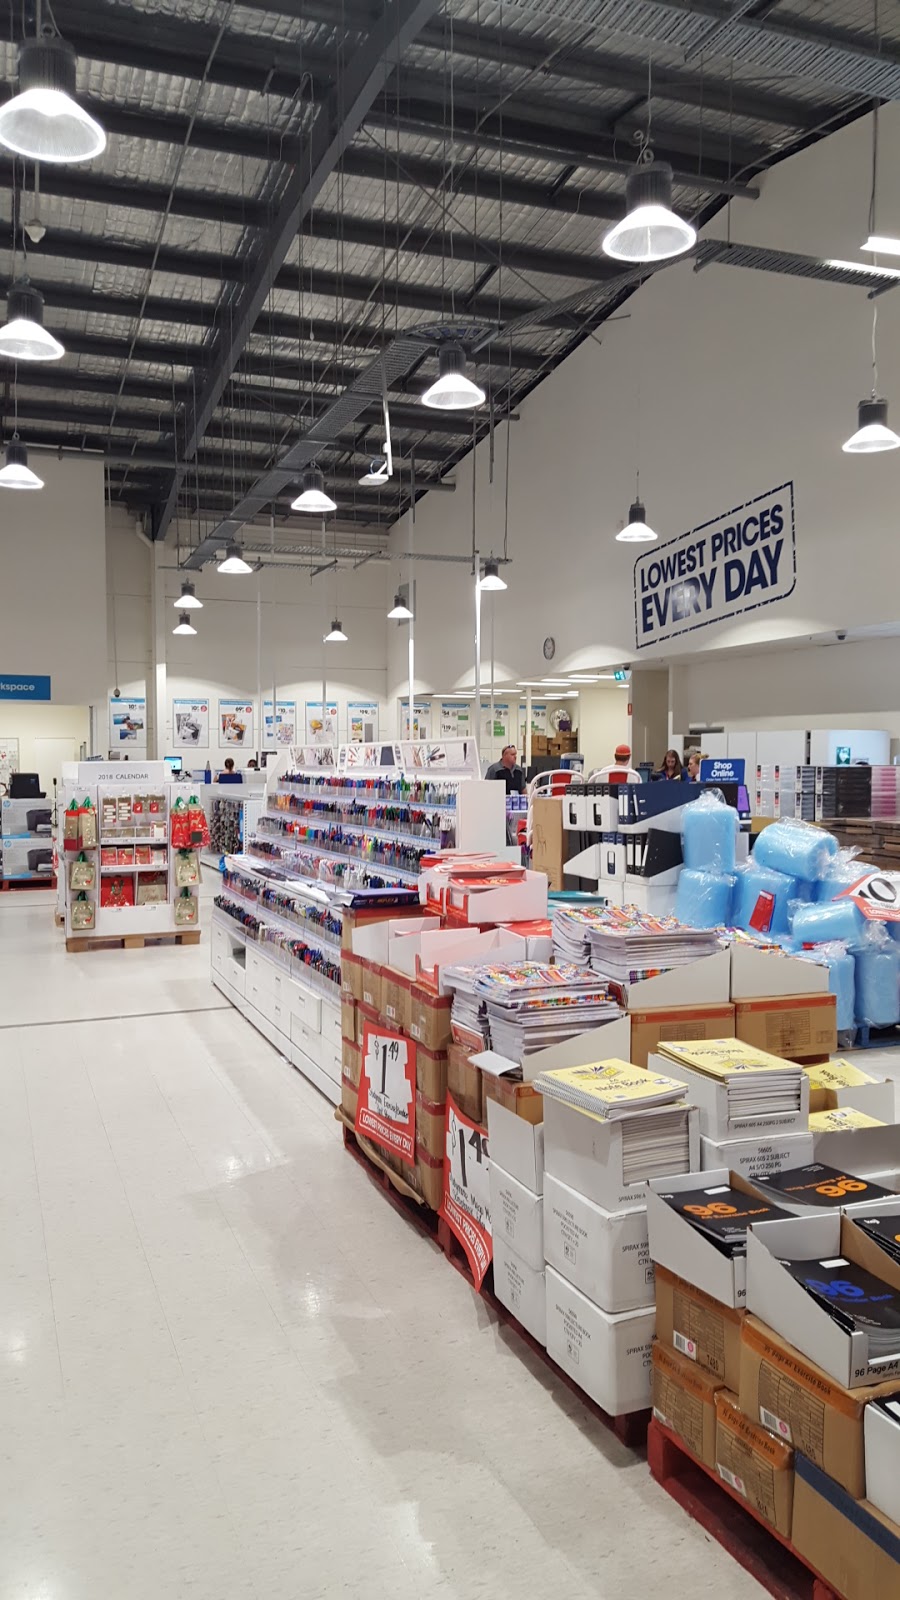 Officeworks West Gosford | electronics store | 28 Central Coast Hwy, West Gosford NSW 2250, Australia | 0243362100 OR +61 2 4336 2100